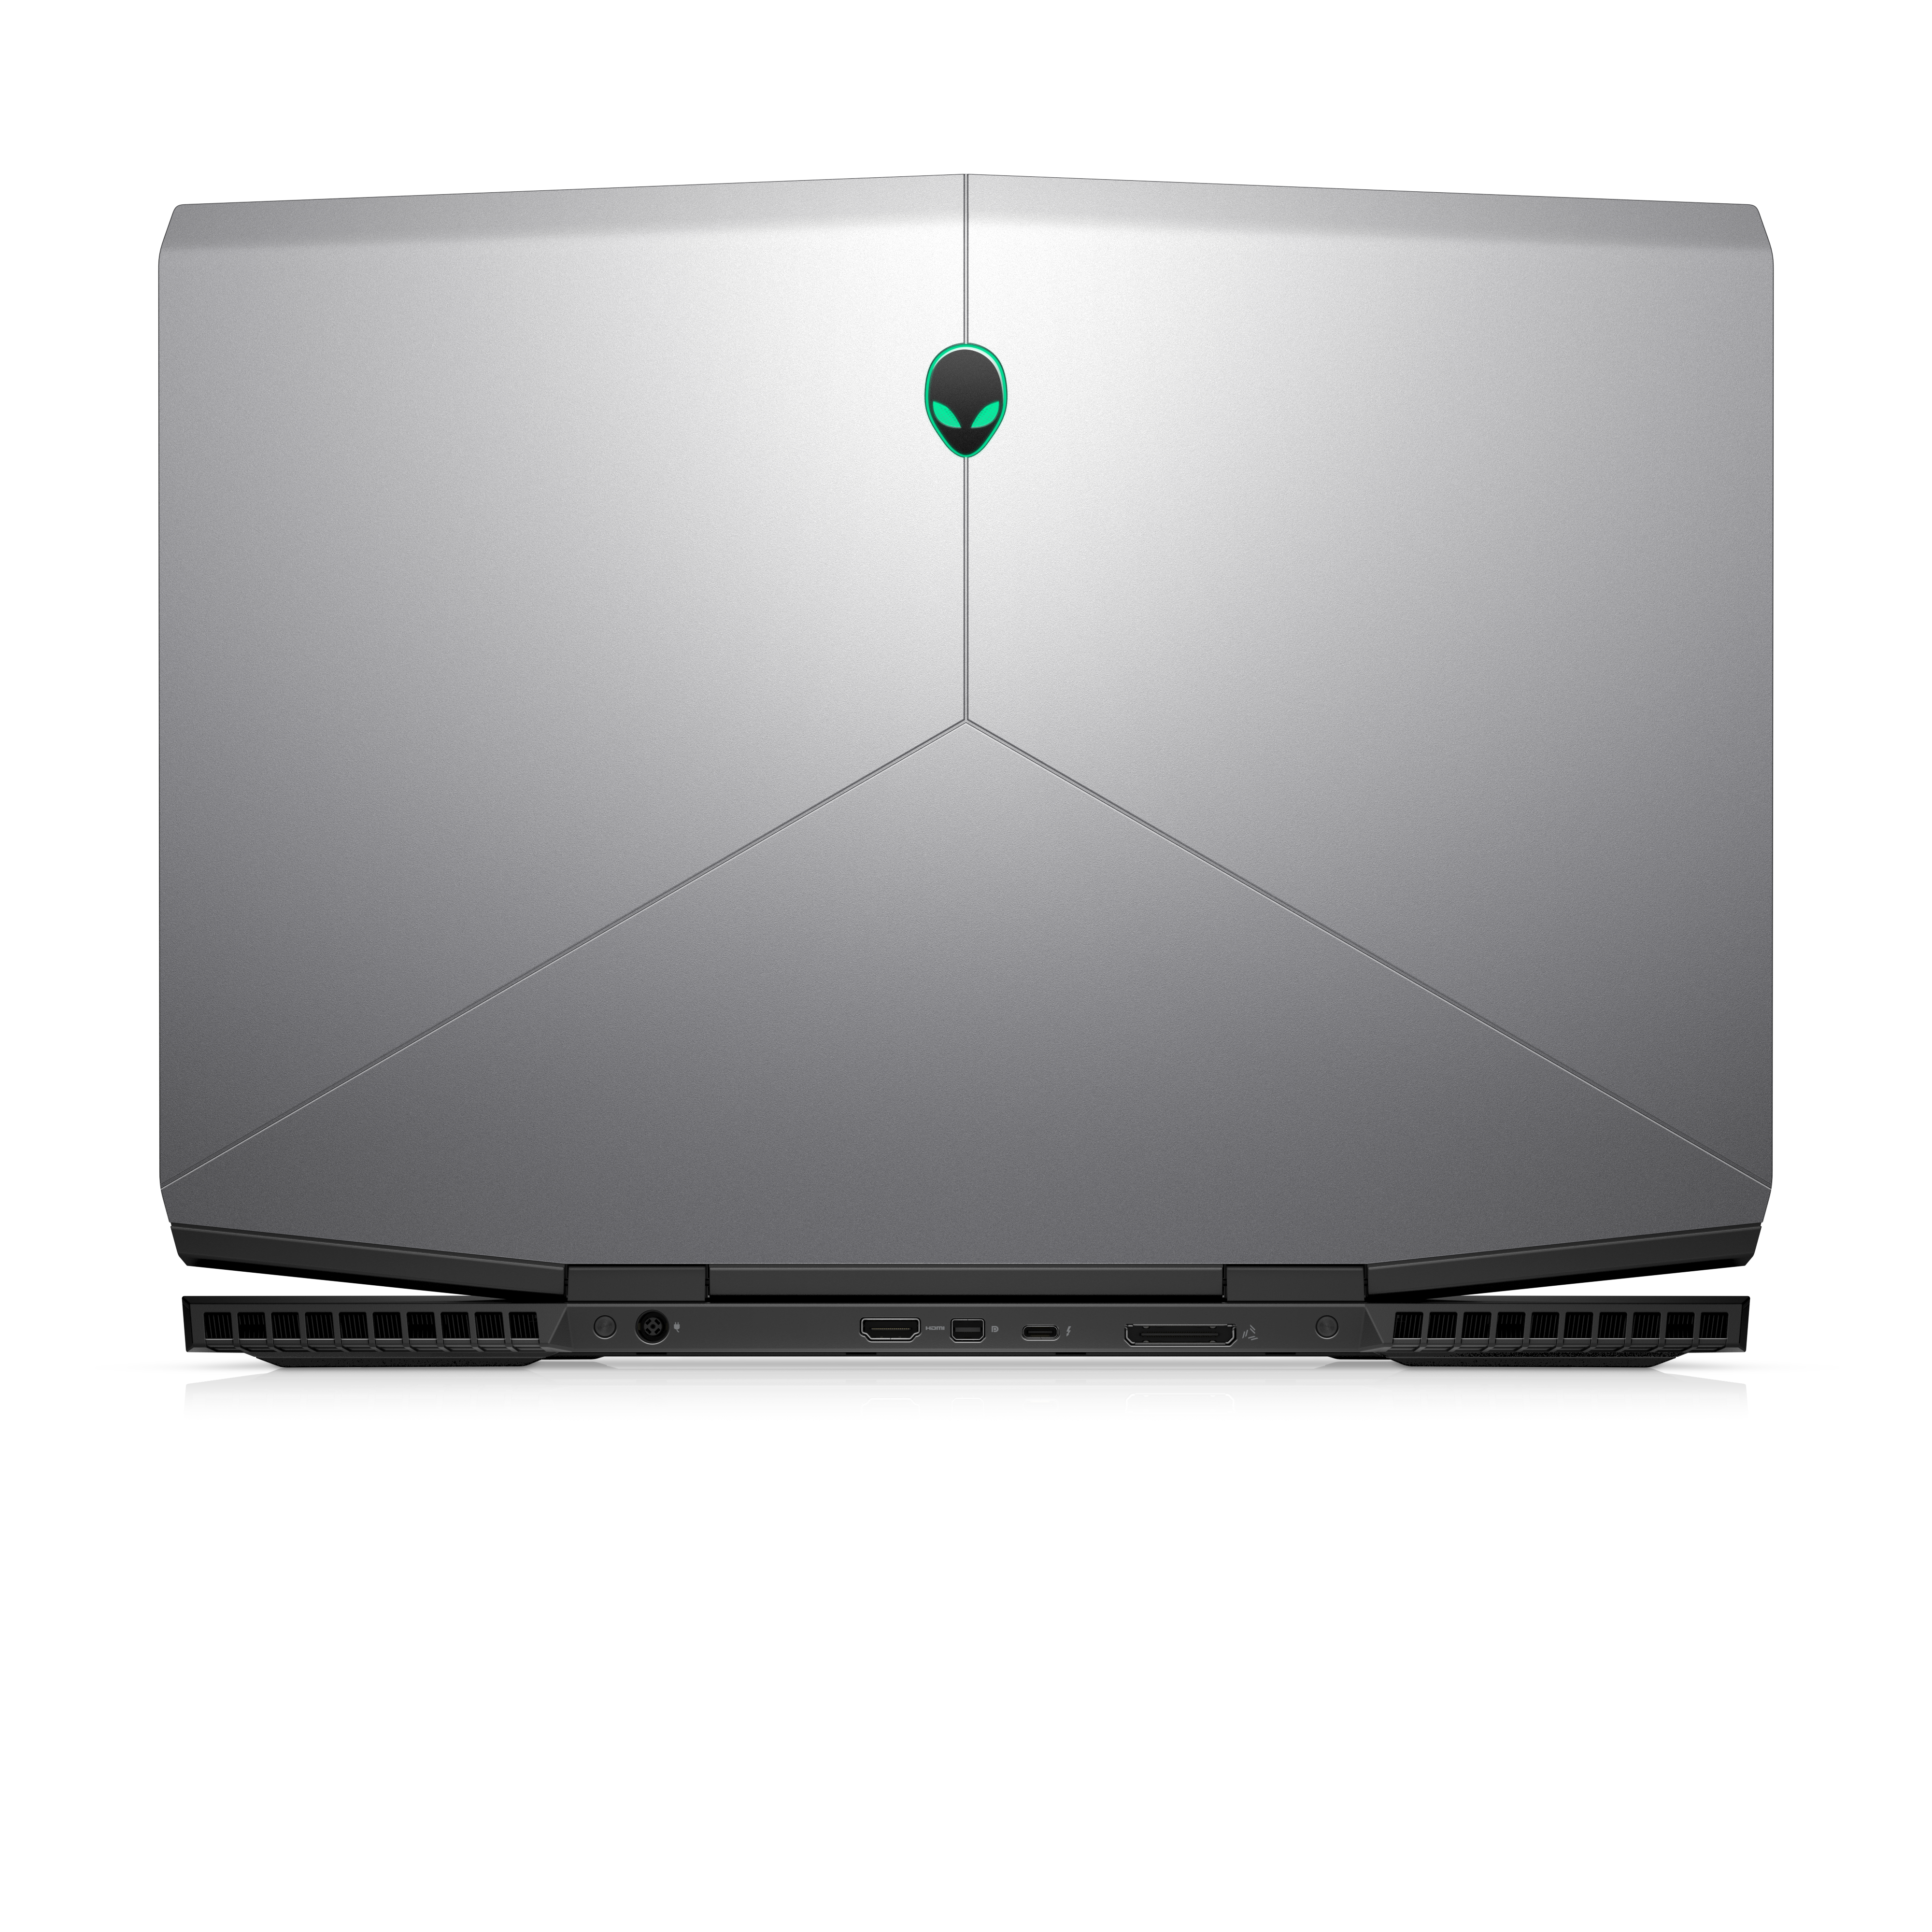 Alienware Debuts its Thinnest and Lightest Alienware m17